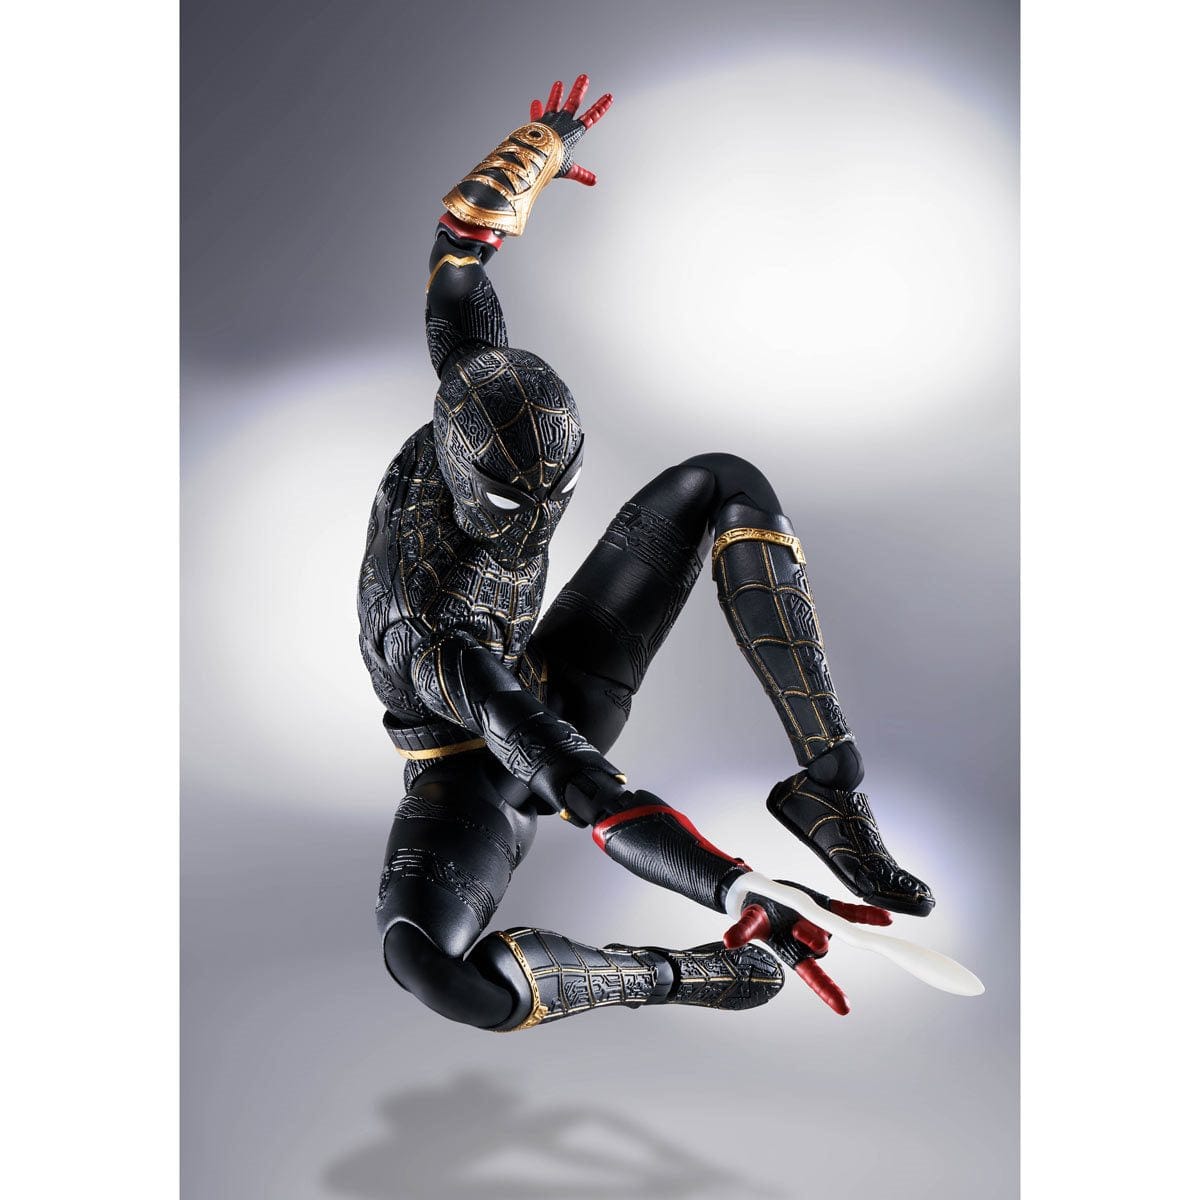 Bandai Tamashii Nations - Spider-Man: No Way Home S.H. Figuarts Action Figure 1/12 Scale Spider-Man Black & Gold Suit (Special Set)